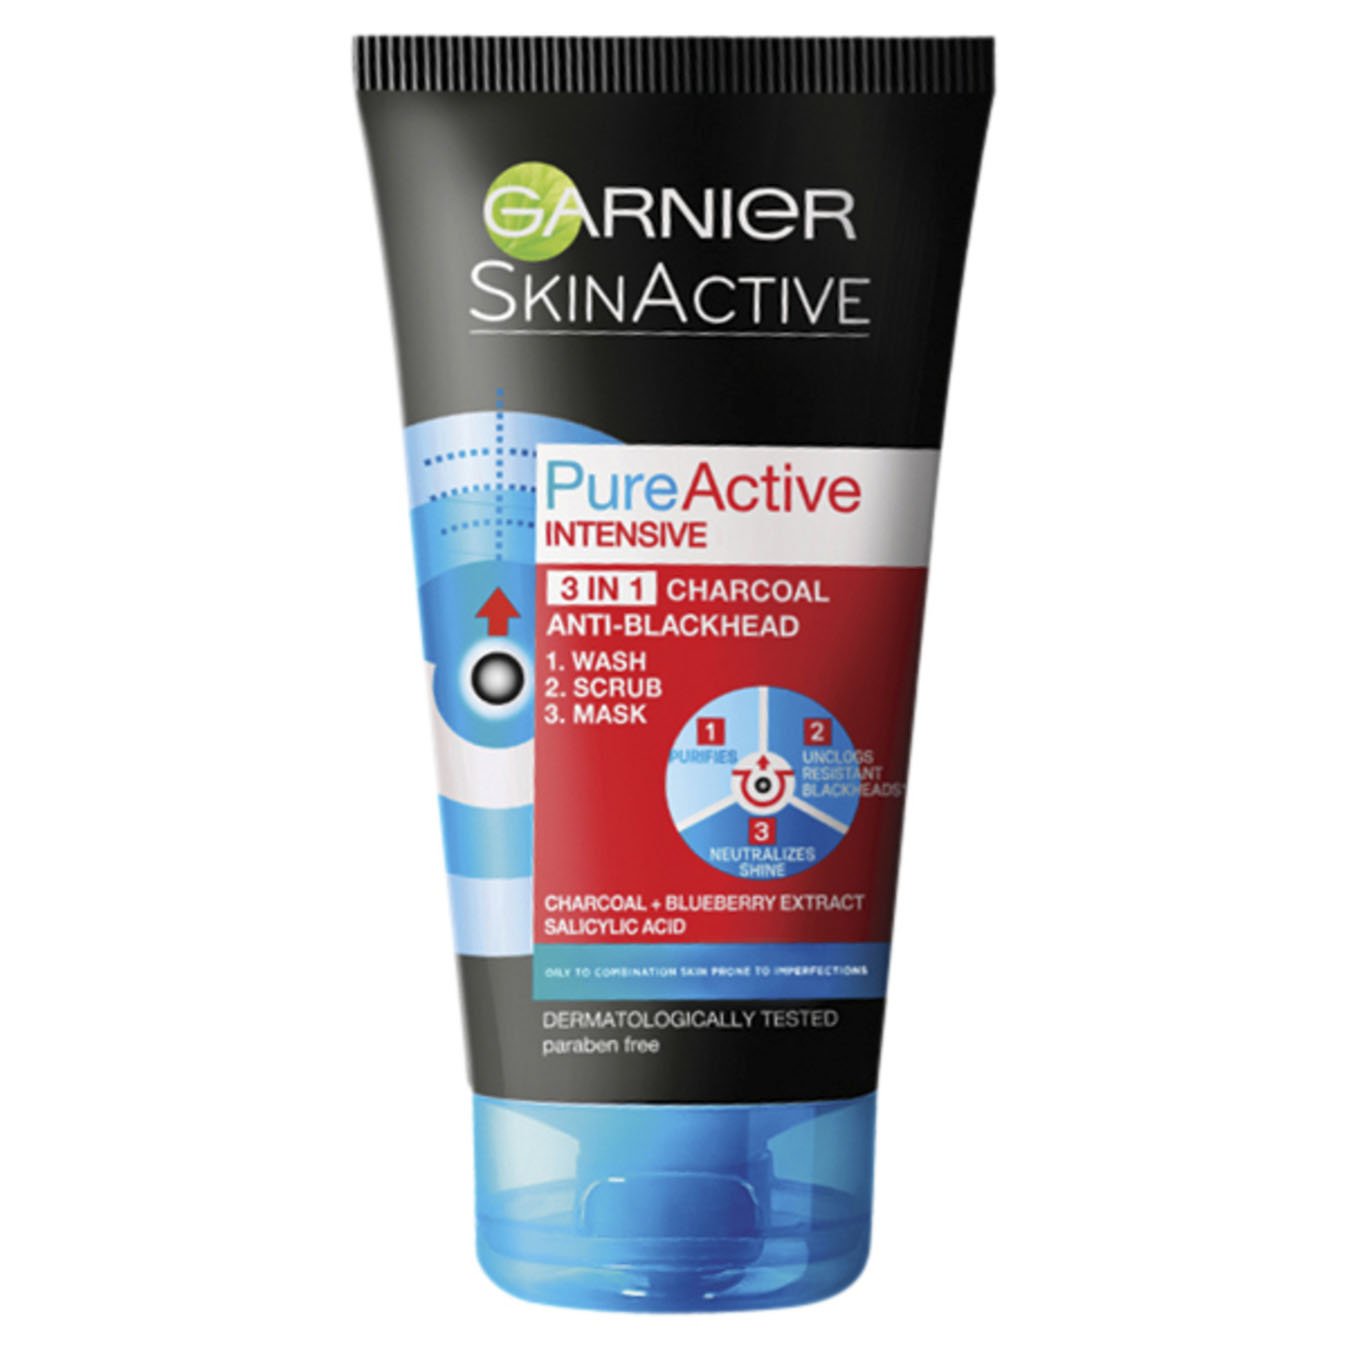 pure active intensive charcoal 3 in 1 wash